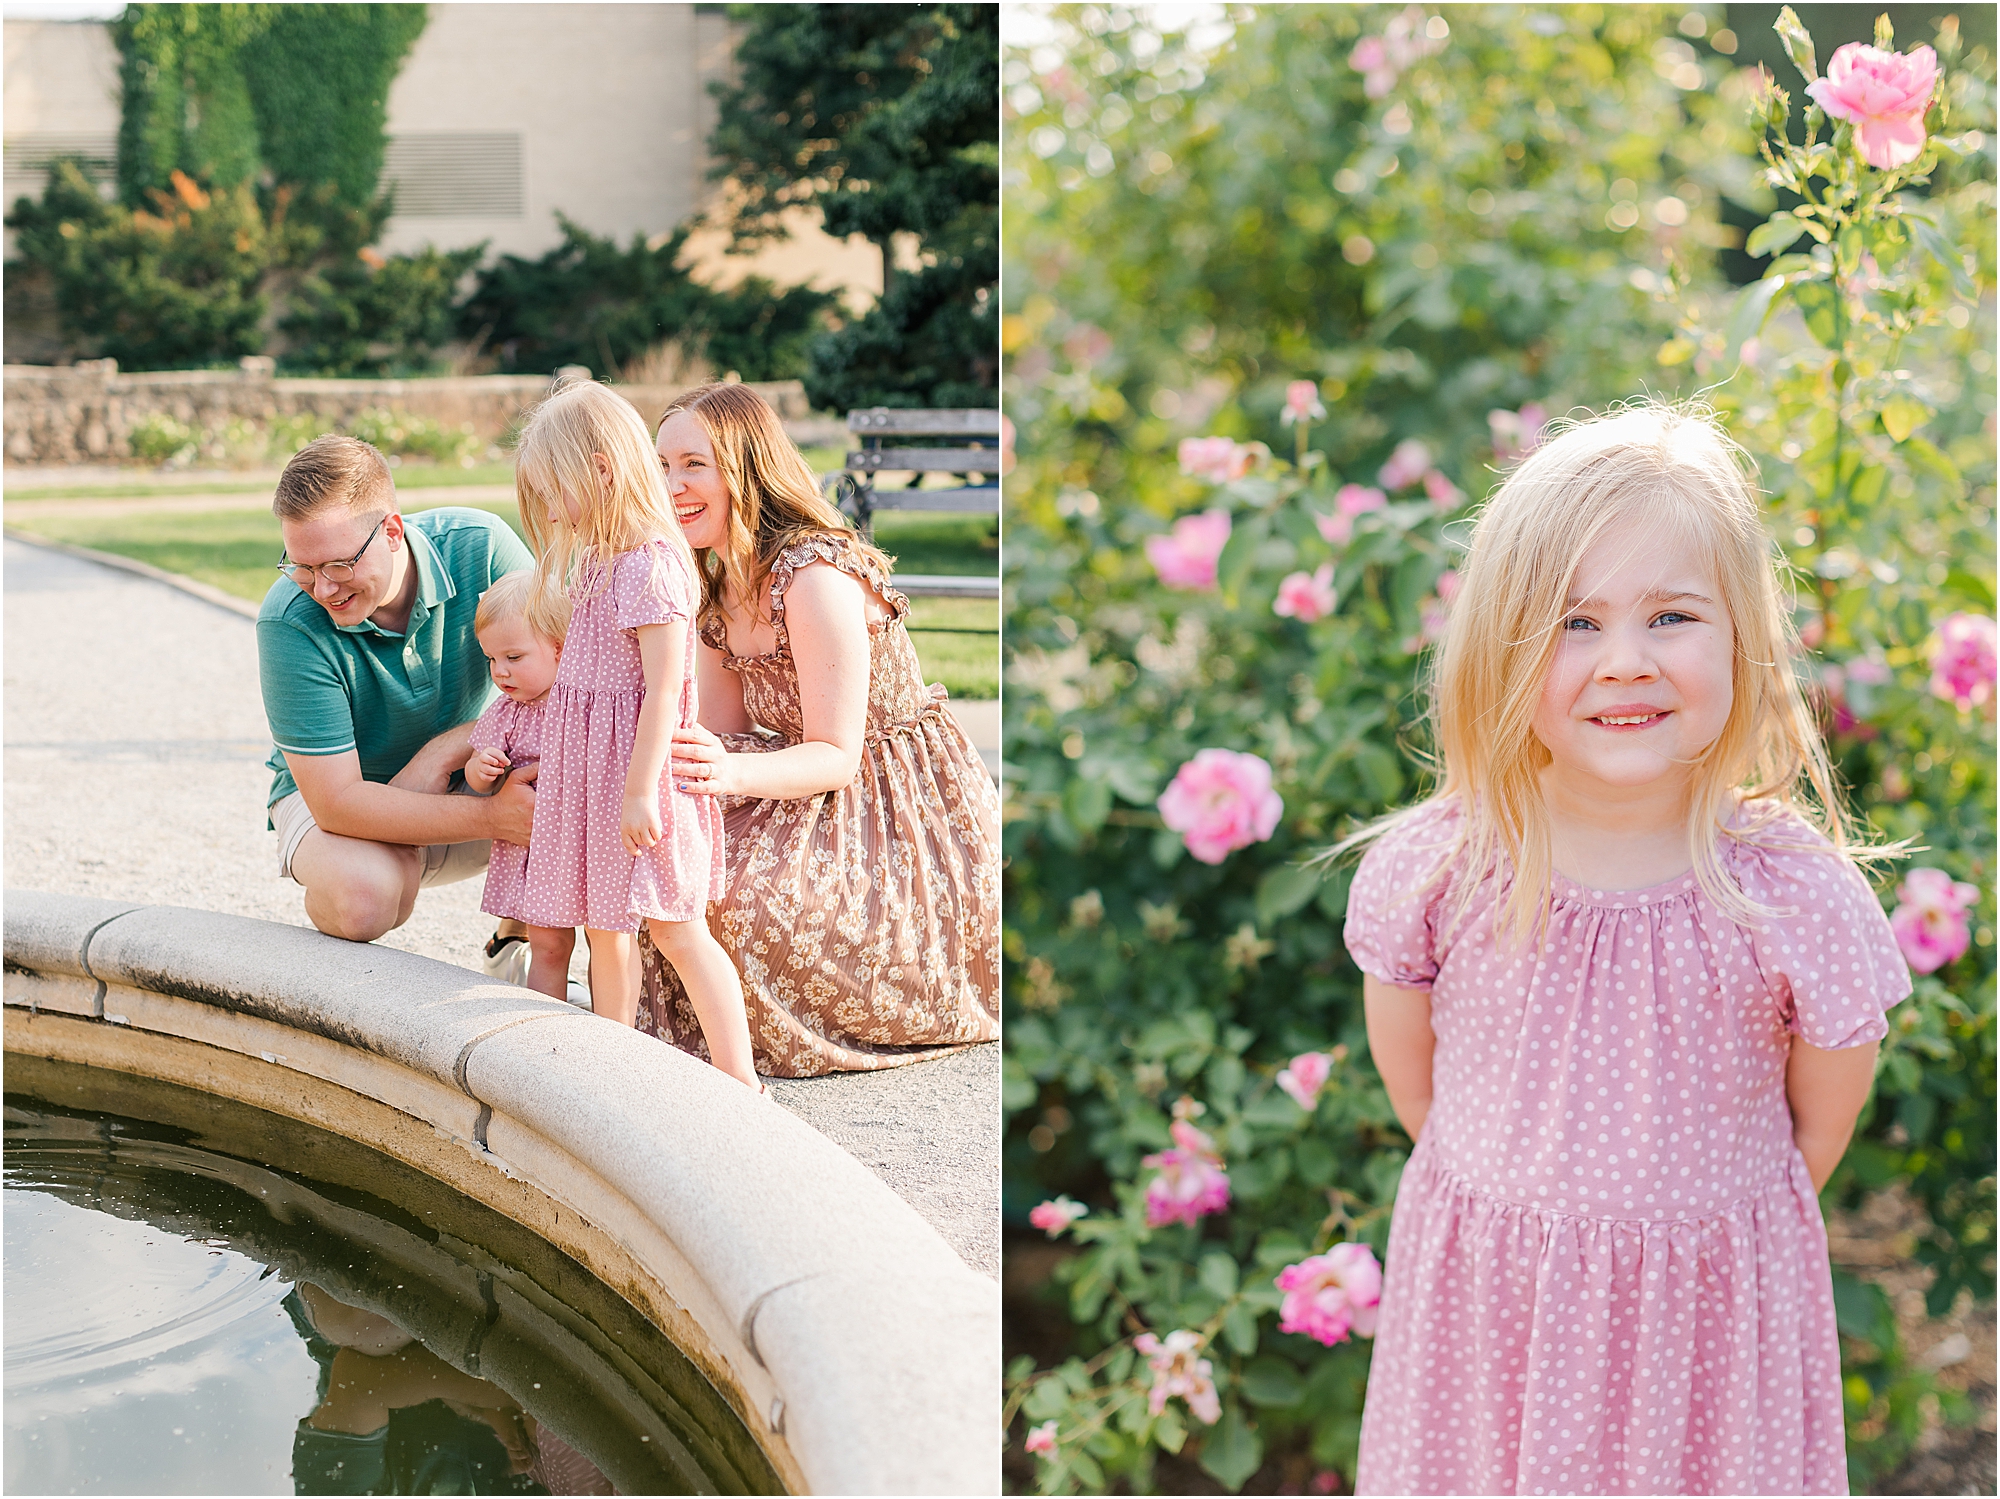 Pretty girl standing in front of a pink rose bush during the summer family photo session.